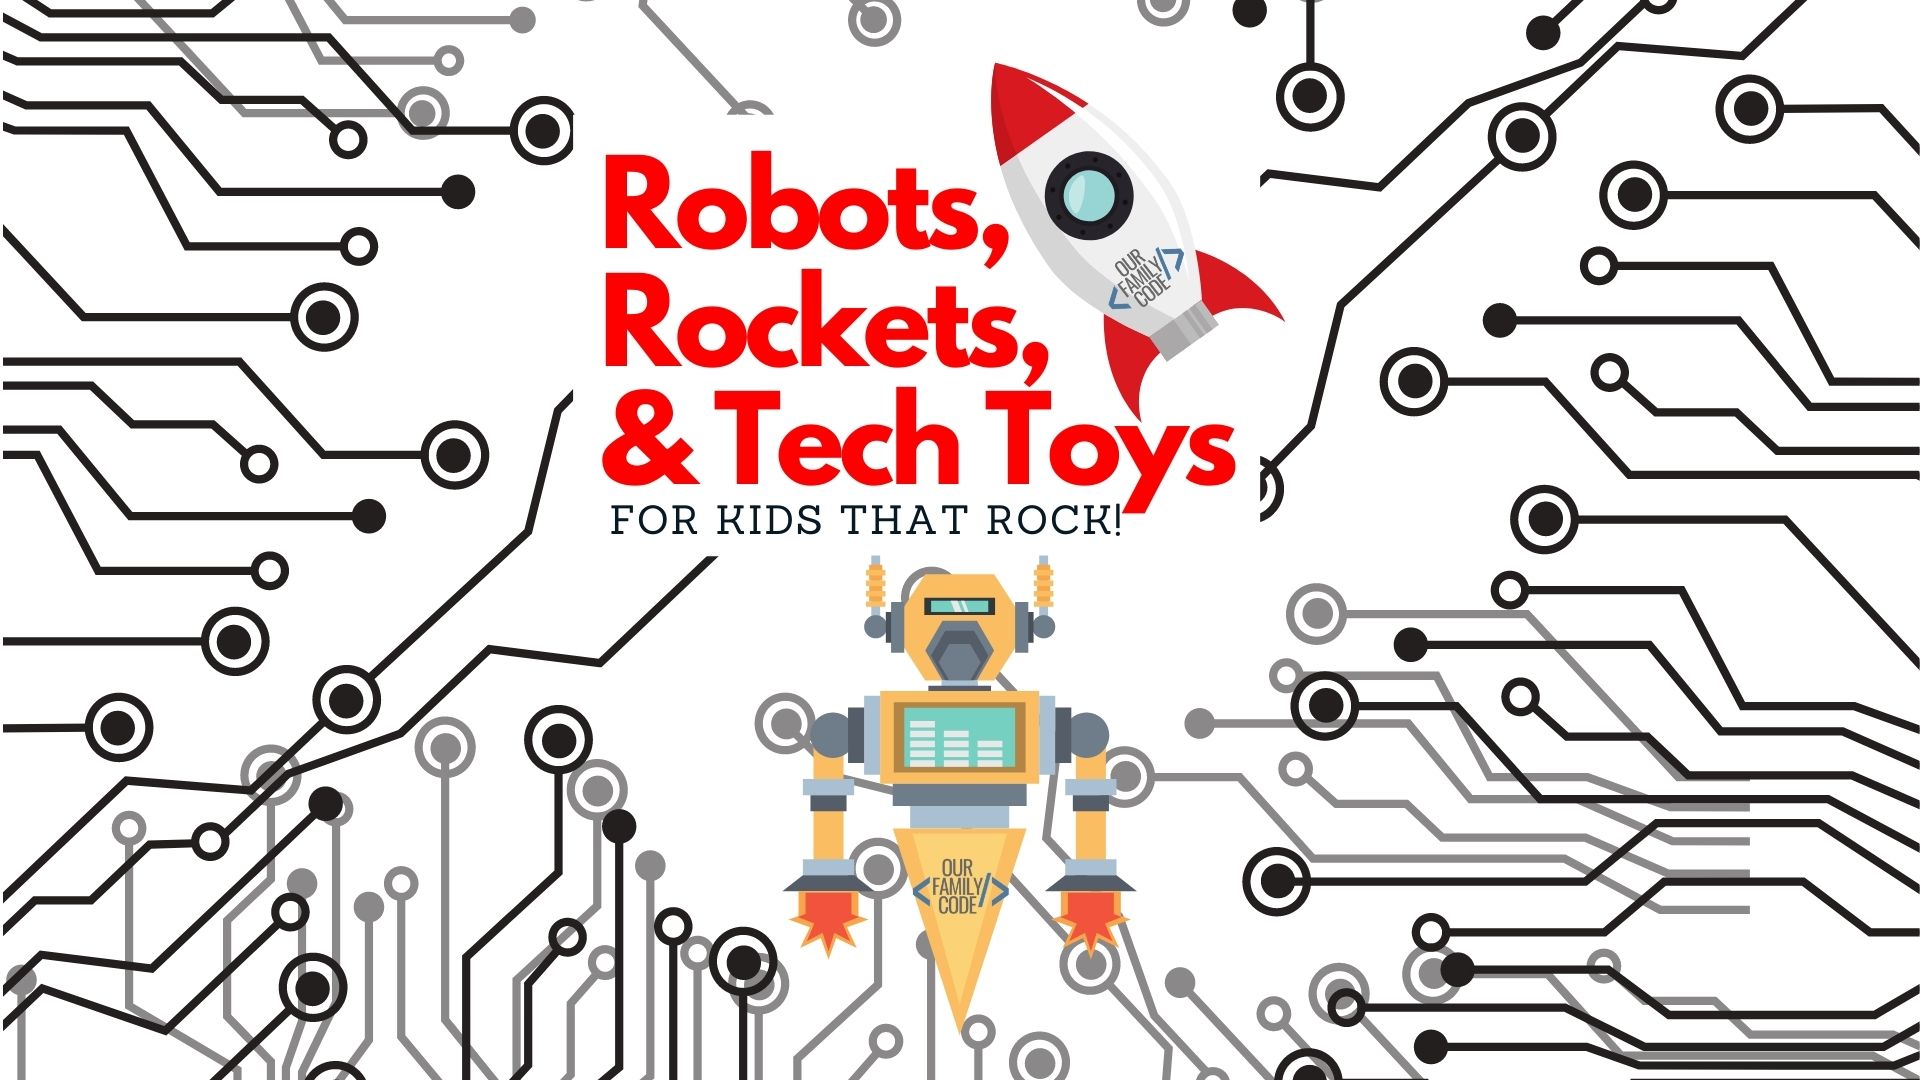 Find the best coding robots for kids, beginner rocket sets for kids, and the top-rated tech toys for kids on this STEM gift guide!